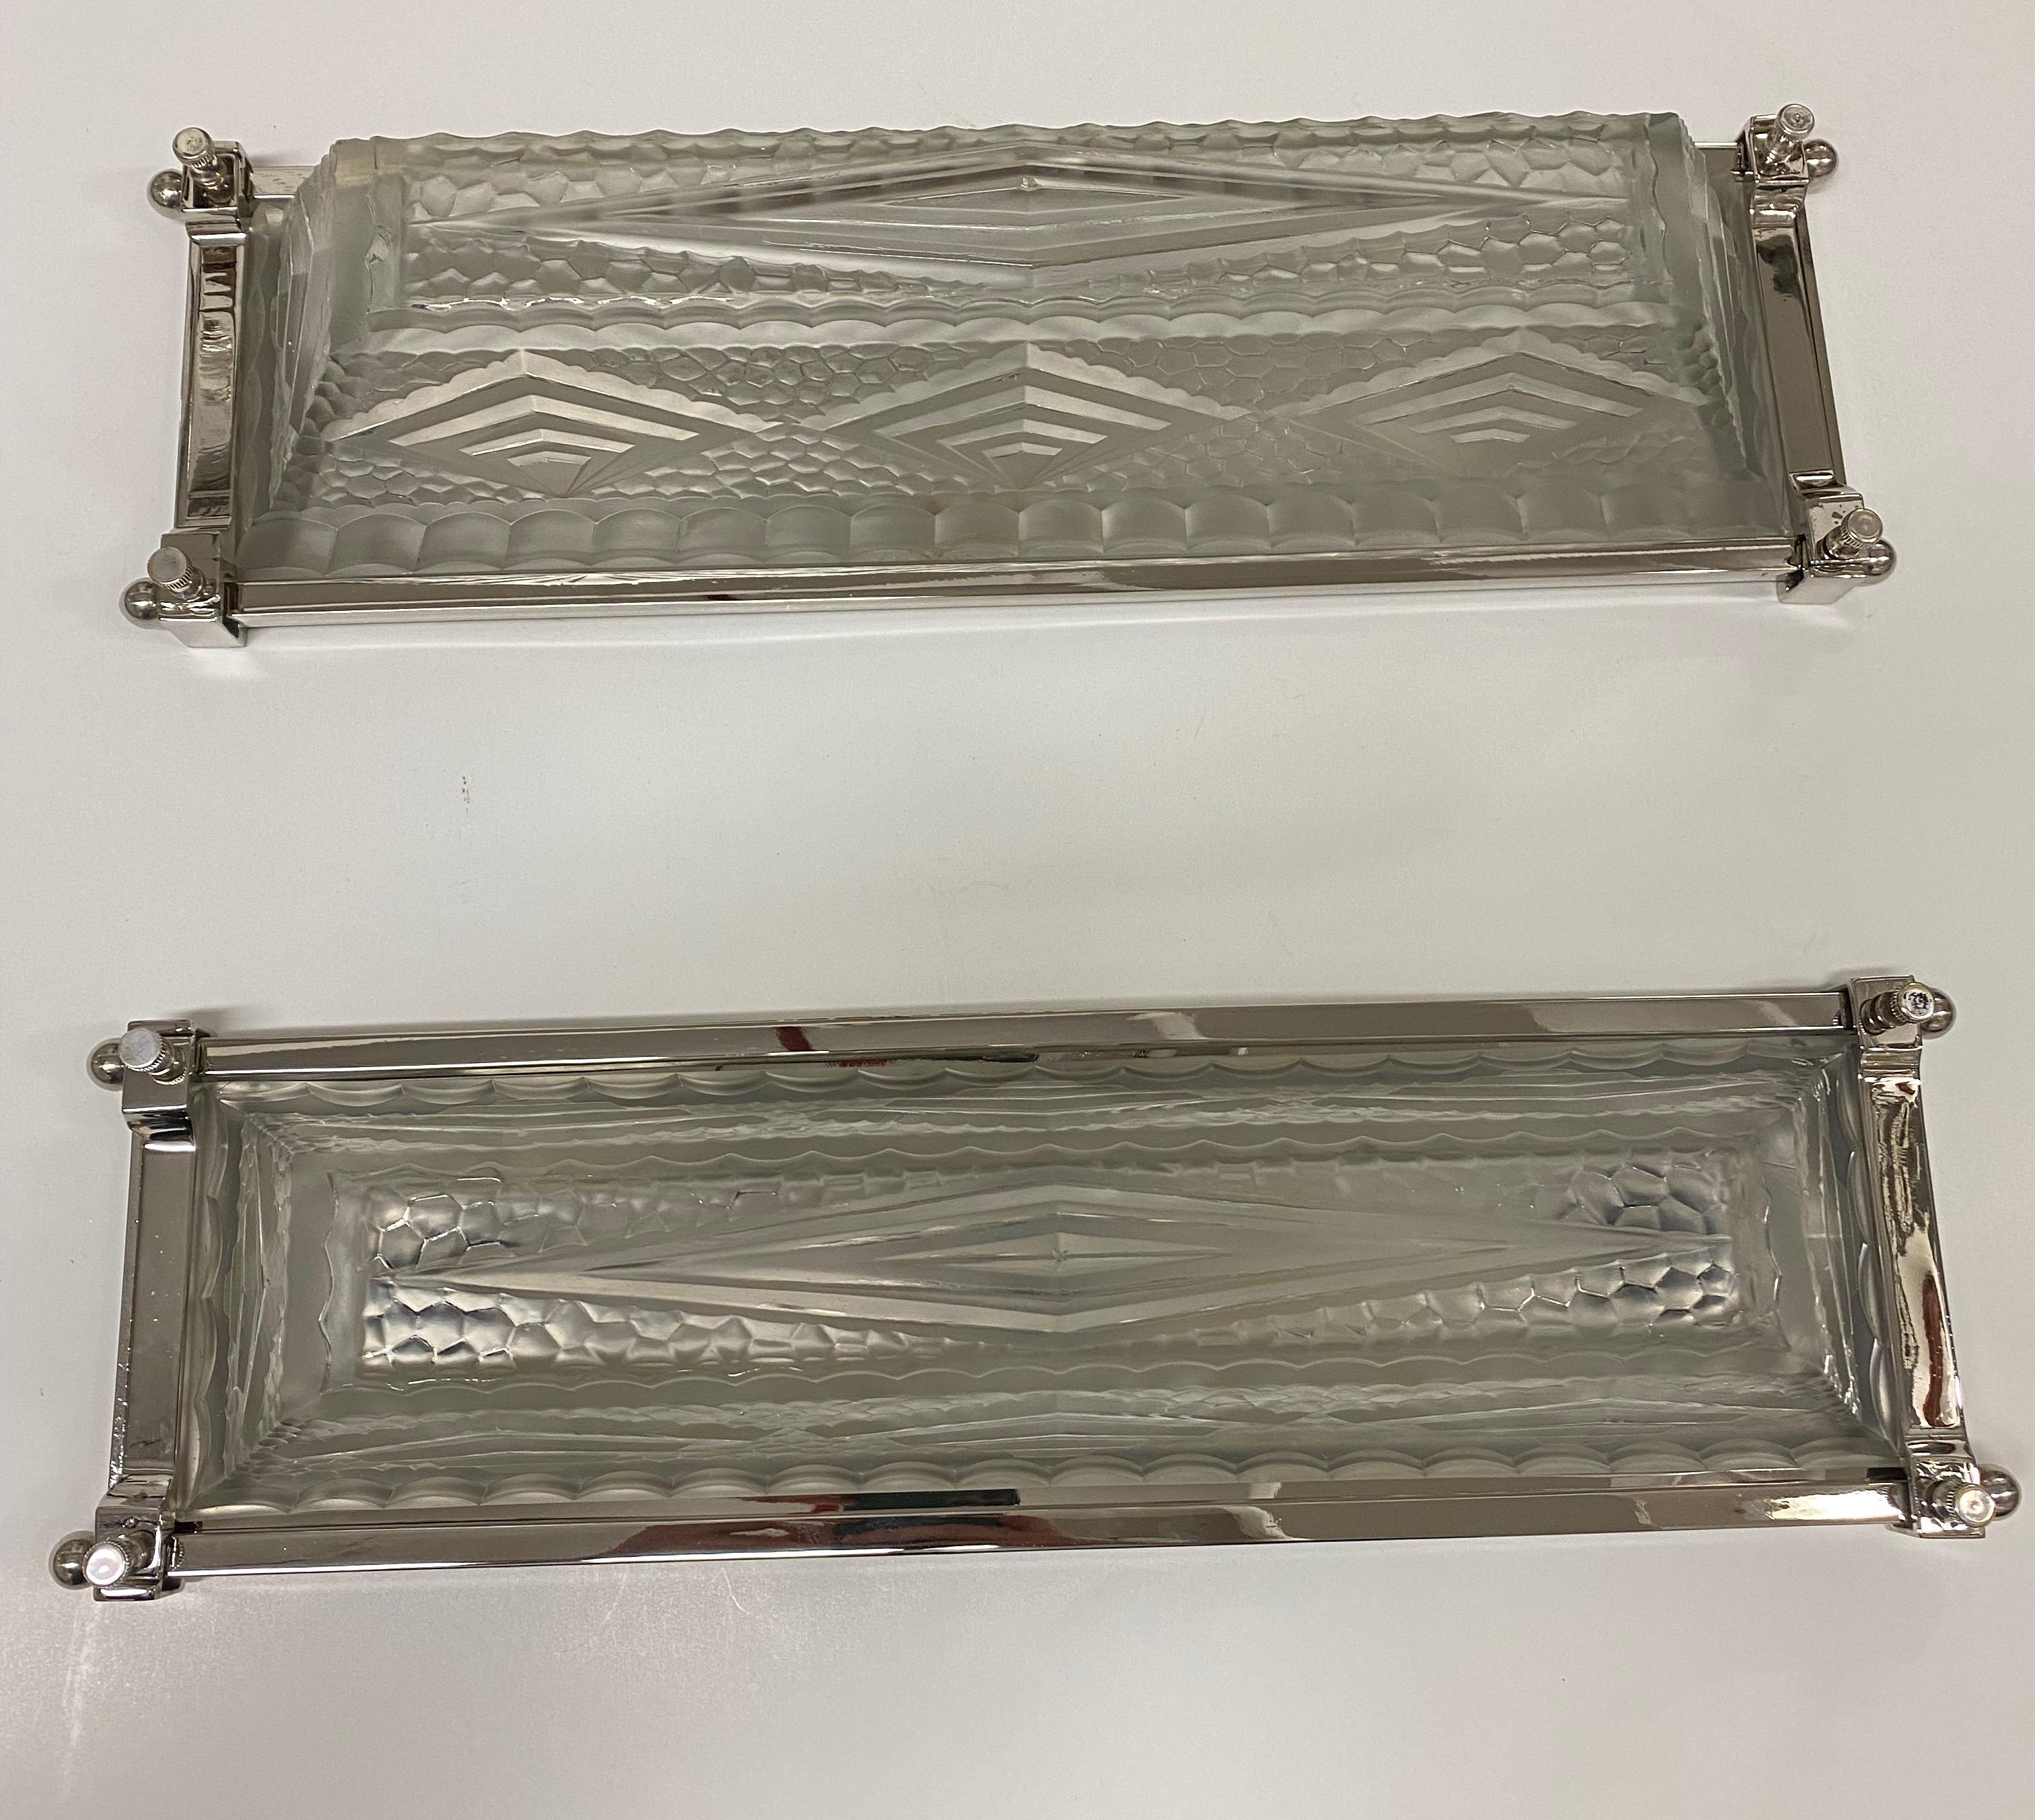 Pair of French Art Deco sconces. With clear frosted glass shades having intricate geometric motif details throughout. Held by a polished nickel plated design frame. Can be hung vertically or horizontally. Has been re wired for American use with two